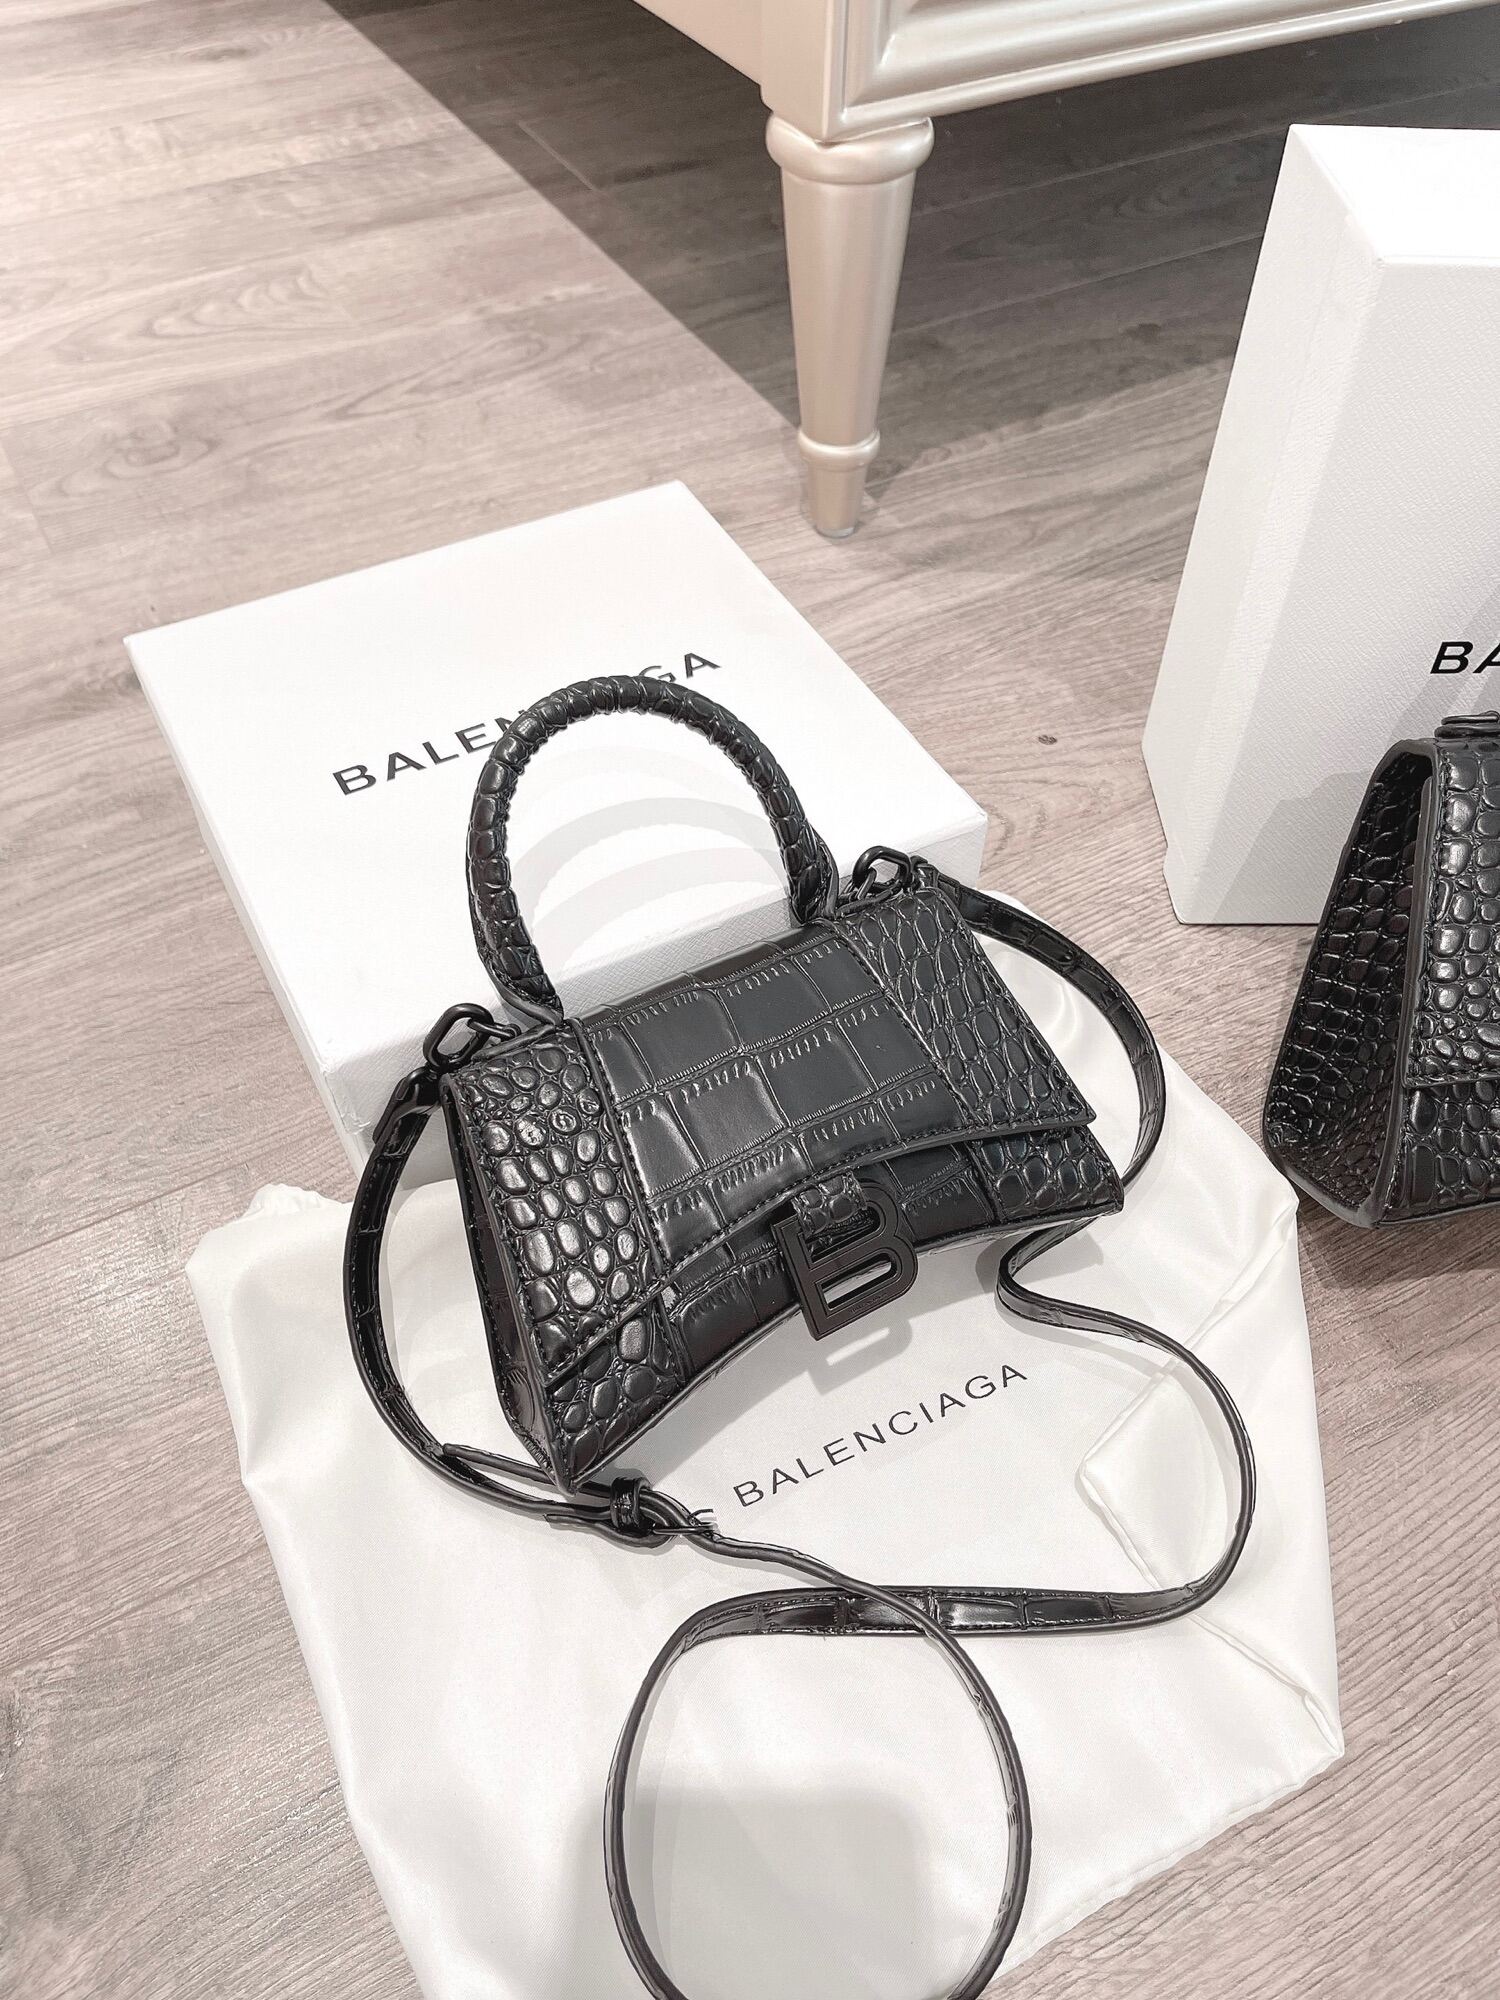 Túi Balenciaga Hourglass 30000000 available to order 𝐁𝐥𝐚𝐧𝐤  𝐑𝐨𝐨𝐦  𝐬𝐩𝐞𝐜𝐢𝐦𝐞𝐧 𝟎𝟑 AUTHENTIC ONLY Located in Hà Nội   Instagram